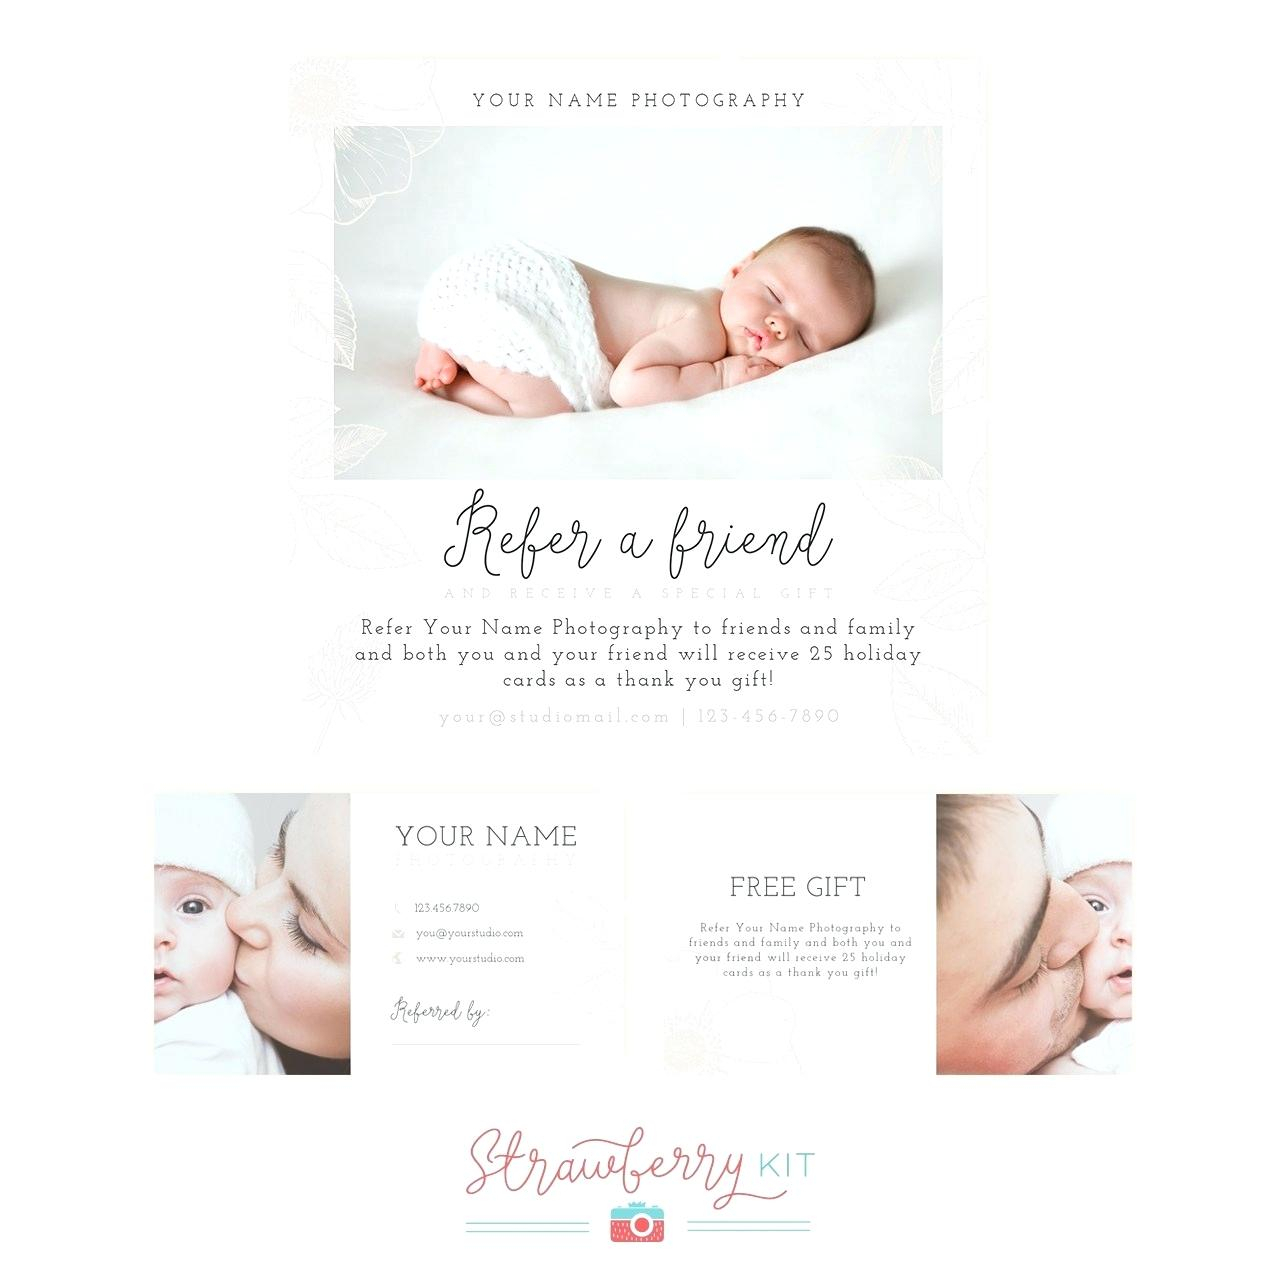 Loyalty Card Template Custom Lash Referral Logo Design With Photography Referral Card Templates